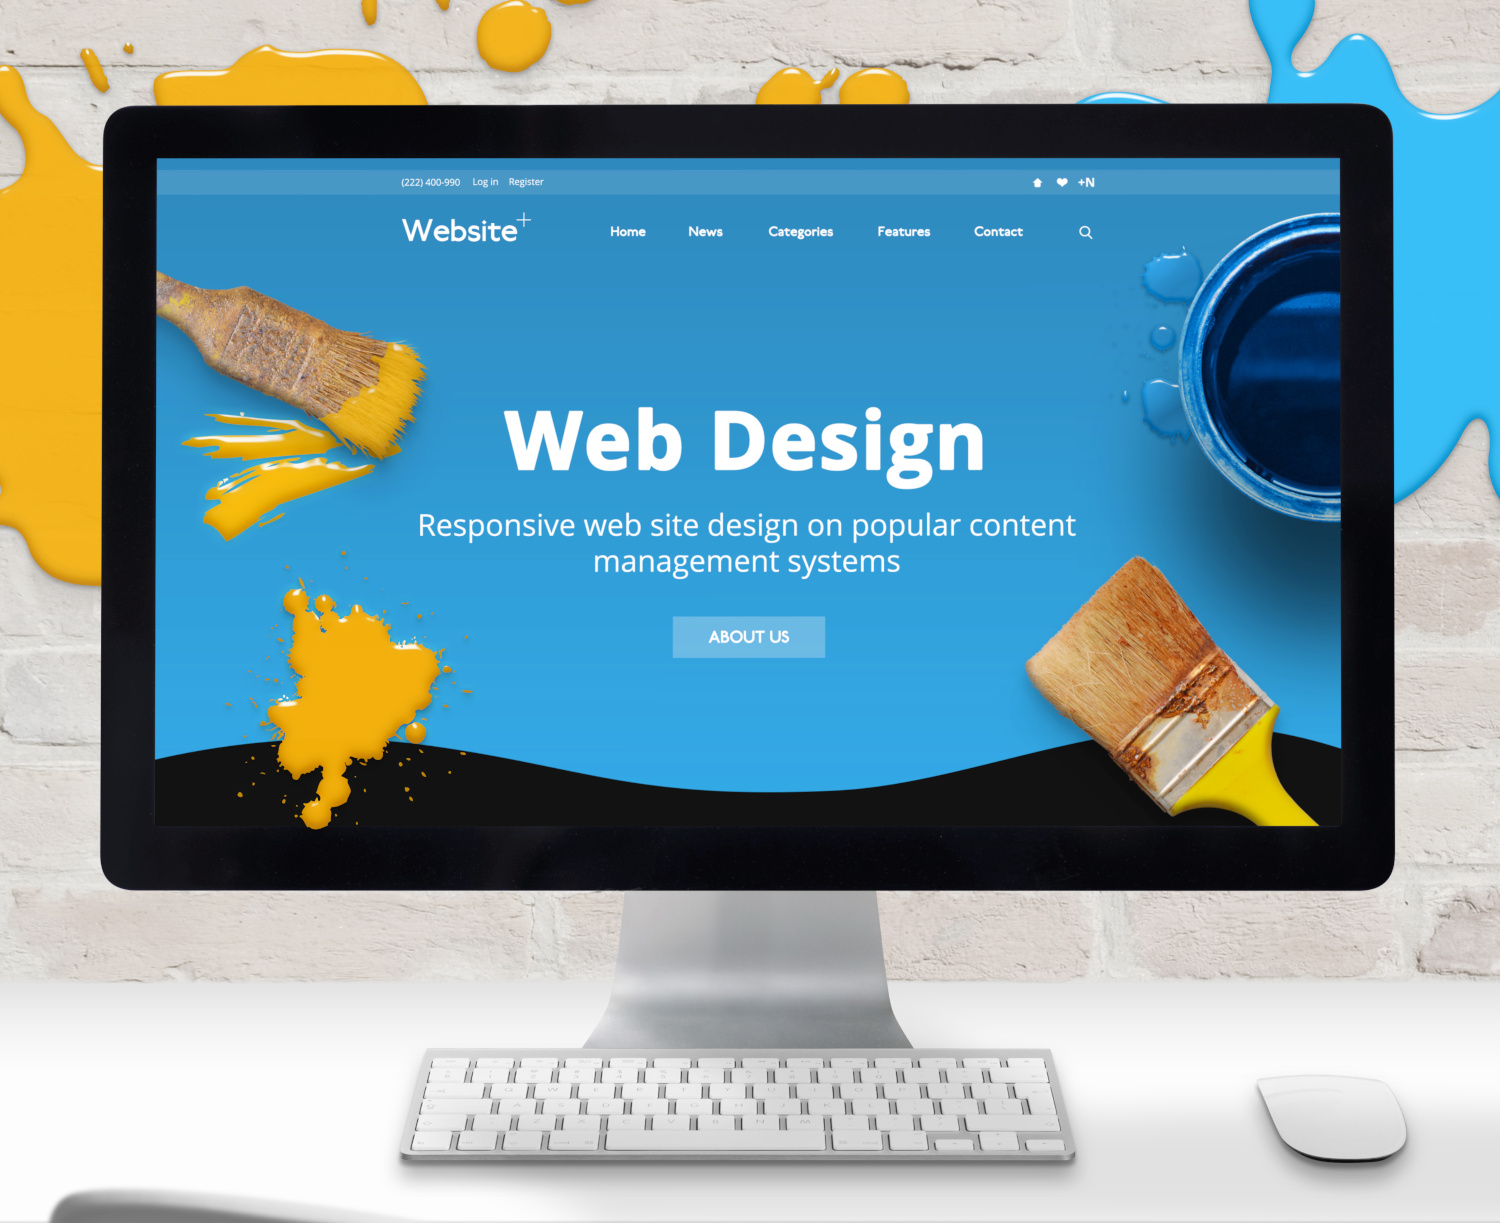 Preparing for your web design project